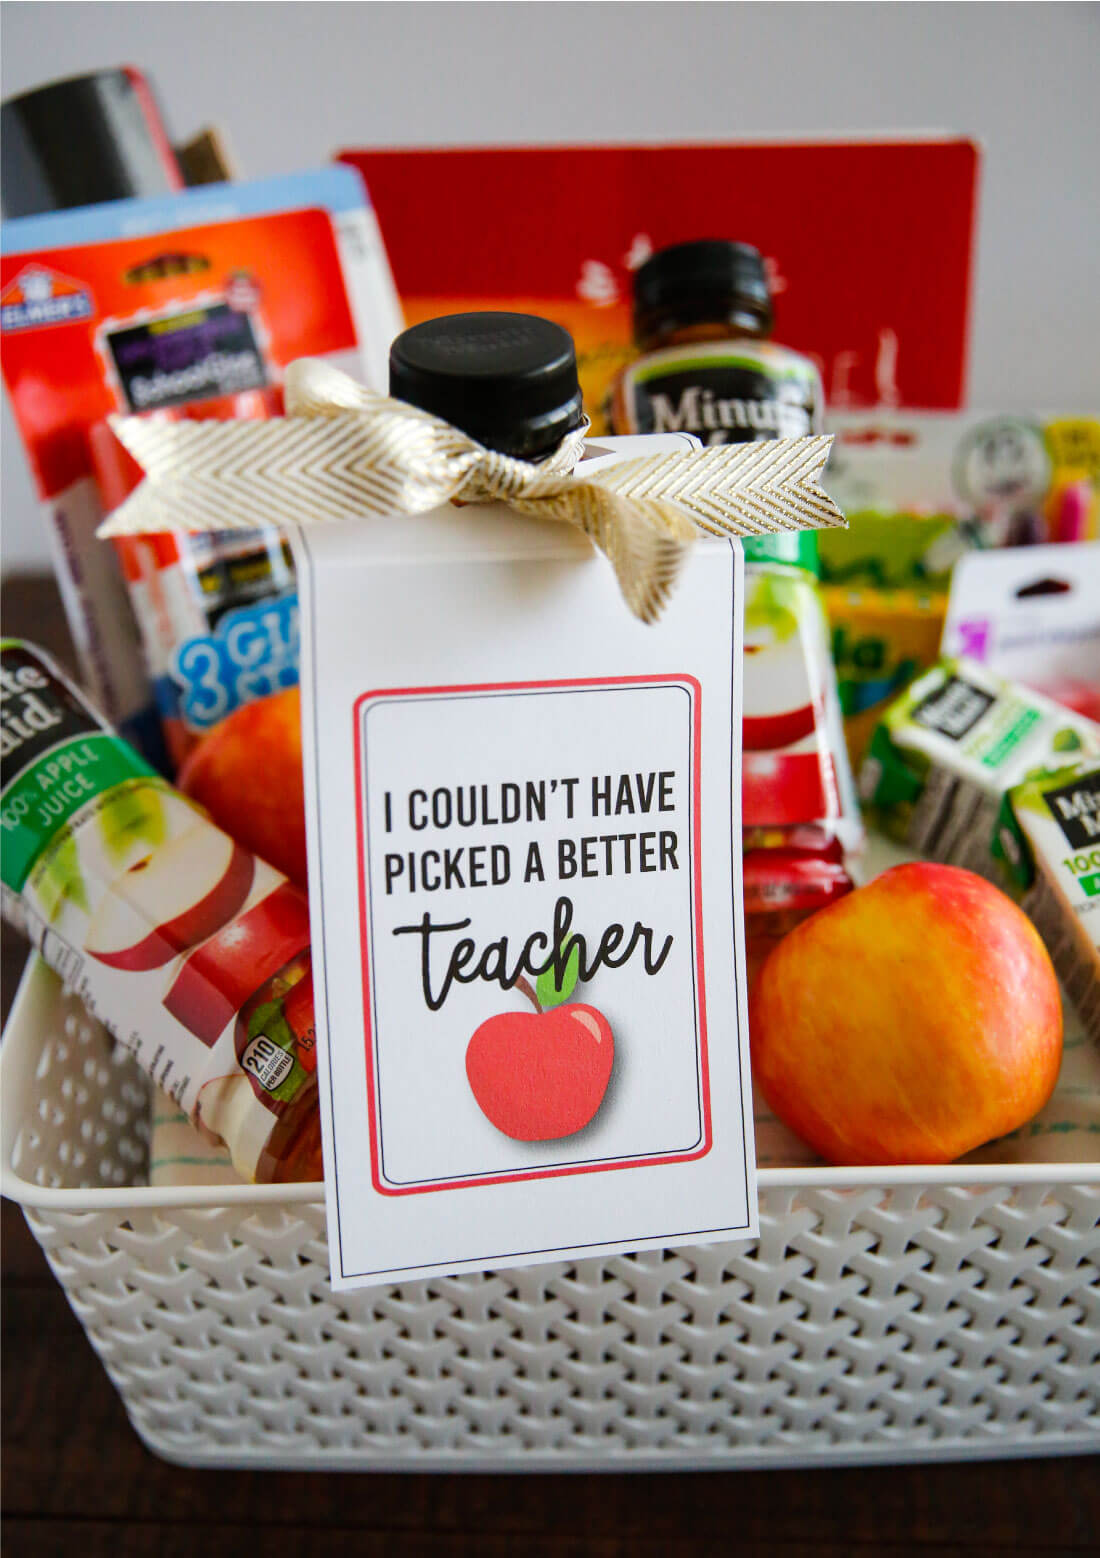 Make a care package for your teacher for back to school with these cute teacher tags! Free printable from www.thirtyhandmadedays.com